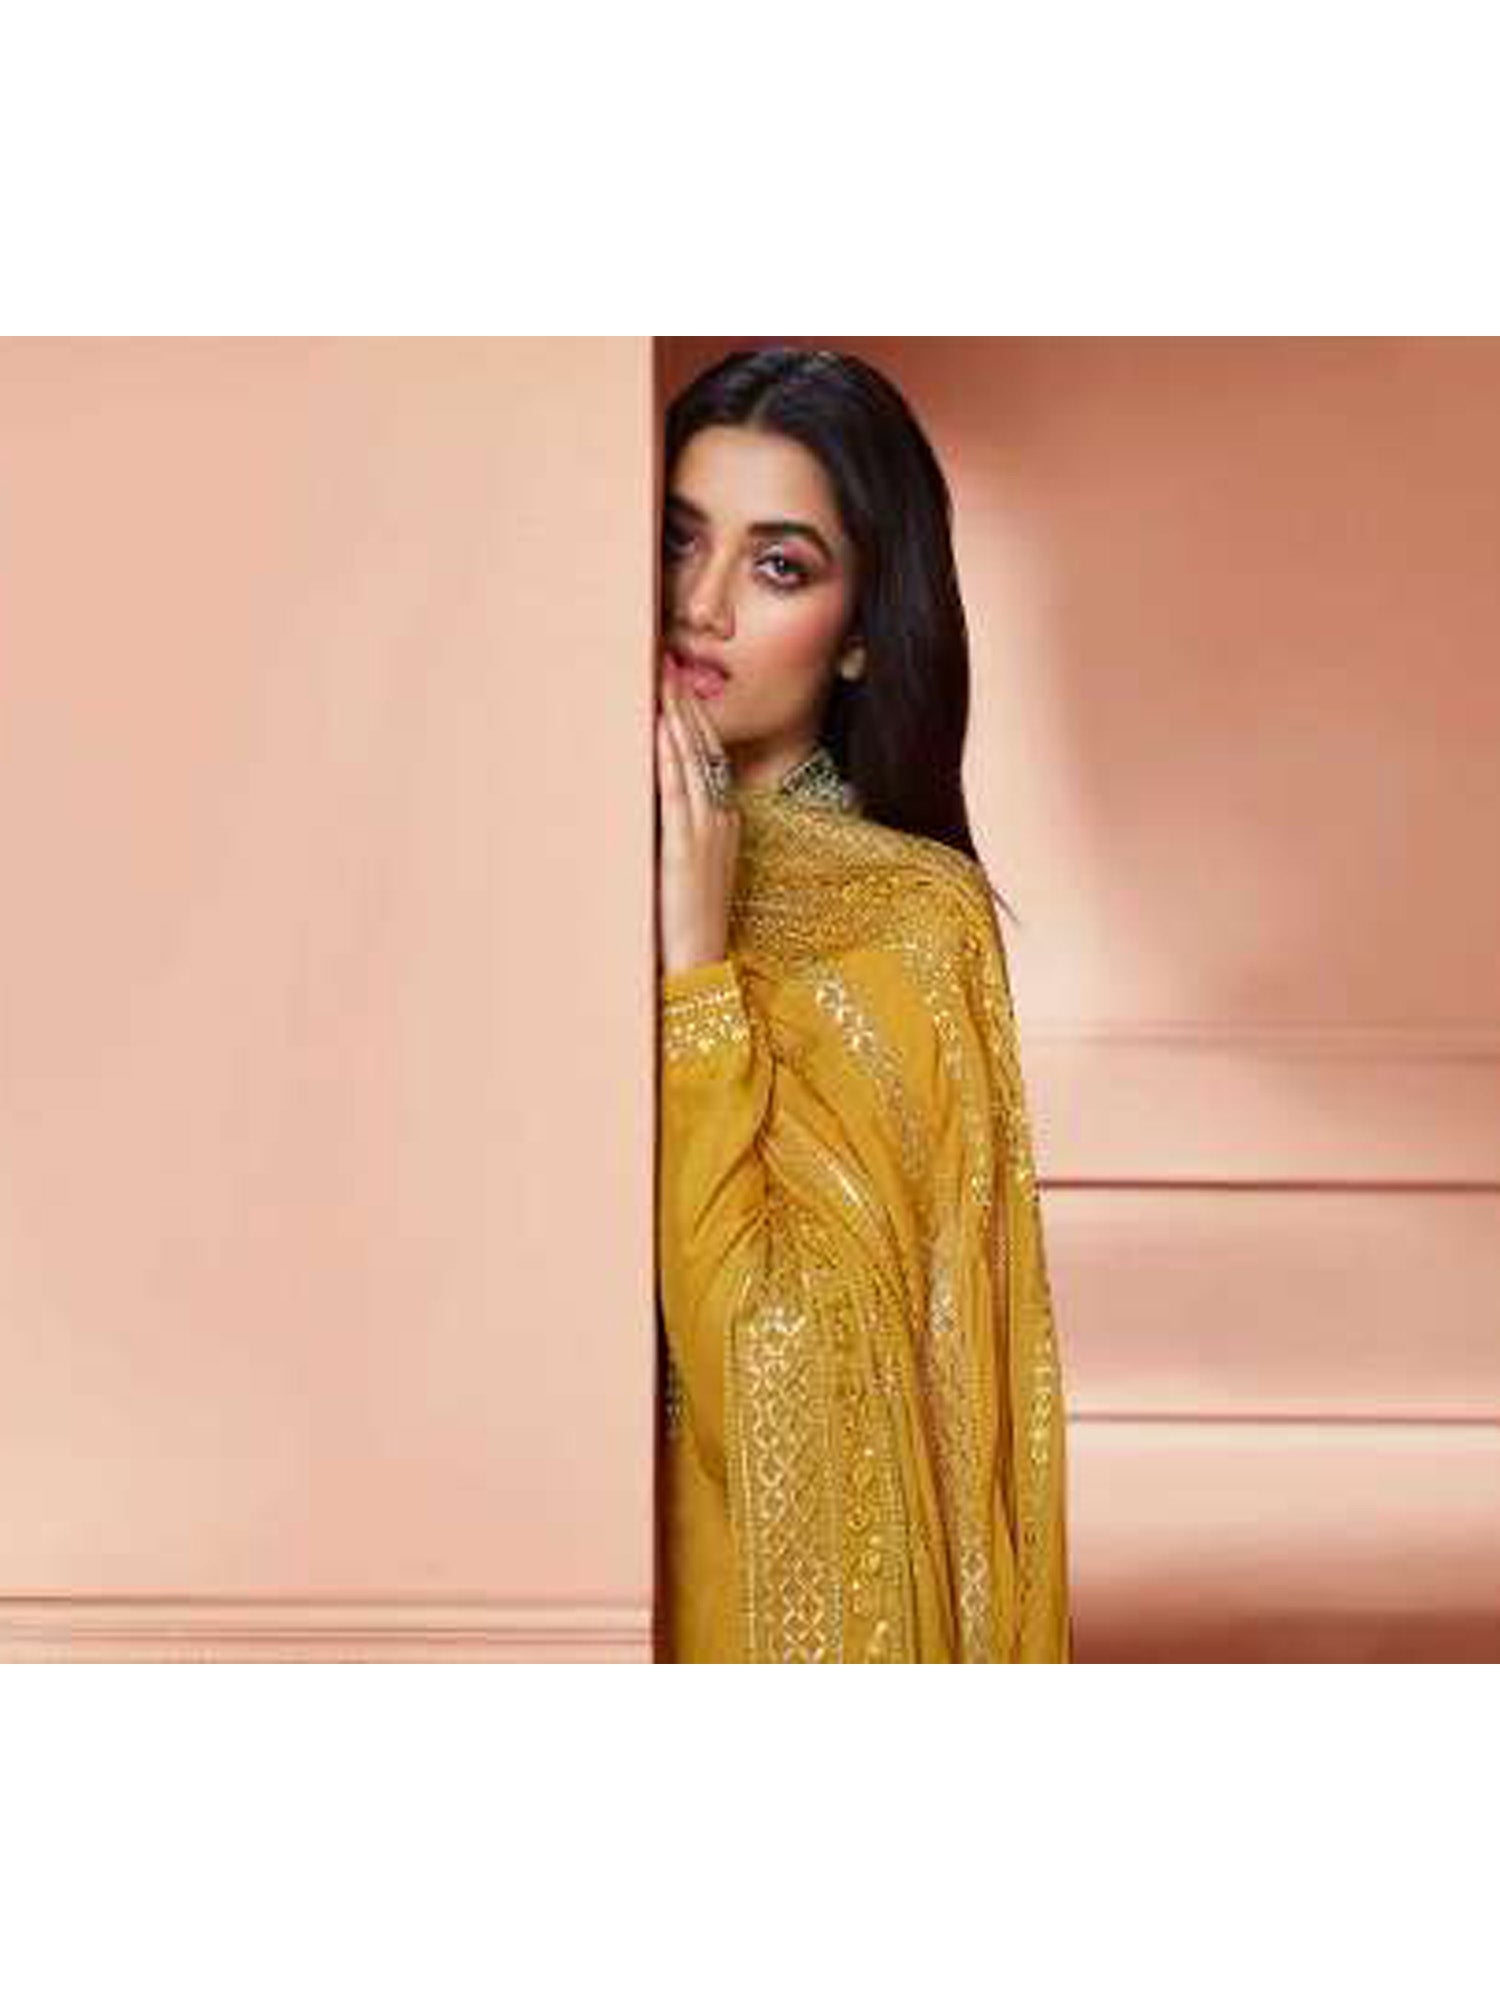 Women's Yellow Dola Silk Embroidered Salwar Suit - Fashion Forever